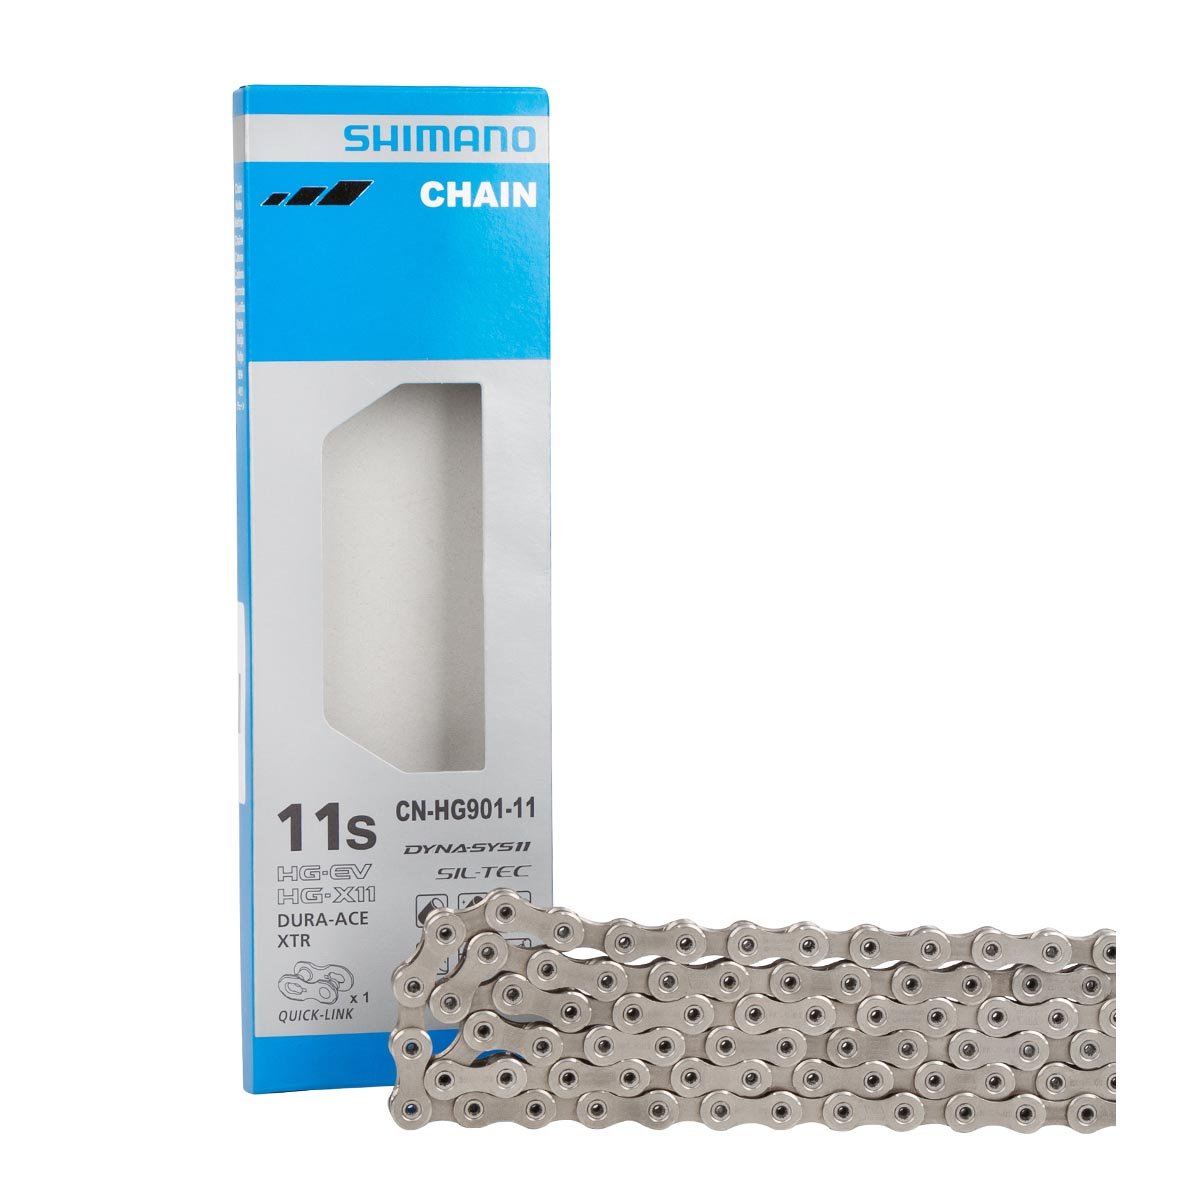 Shimano MTB Chain CN-HG901 11-Speed, 116 Links, with Master Link